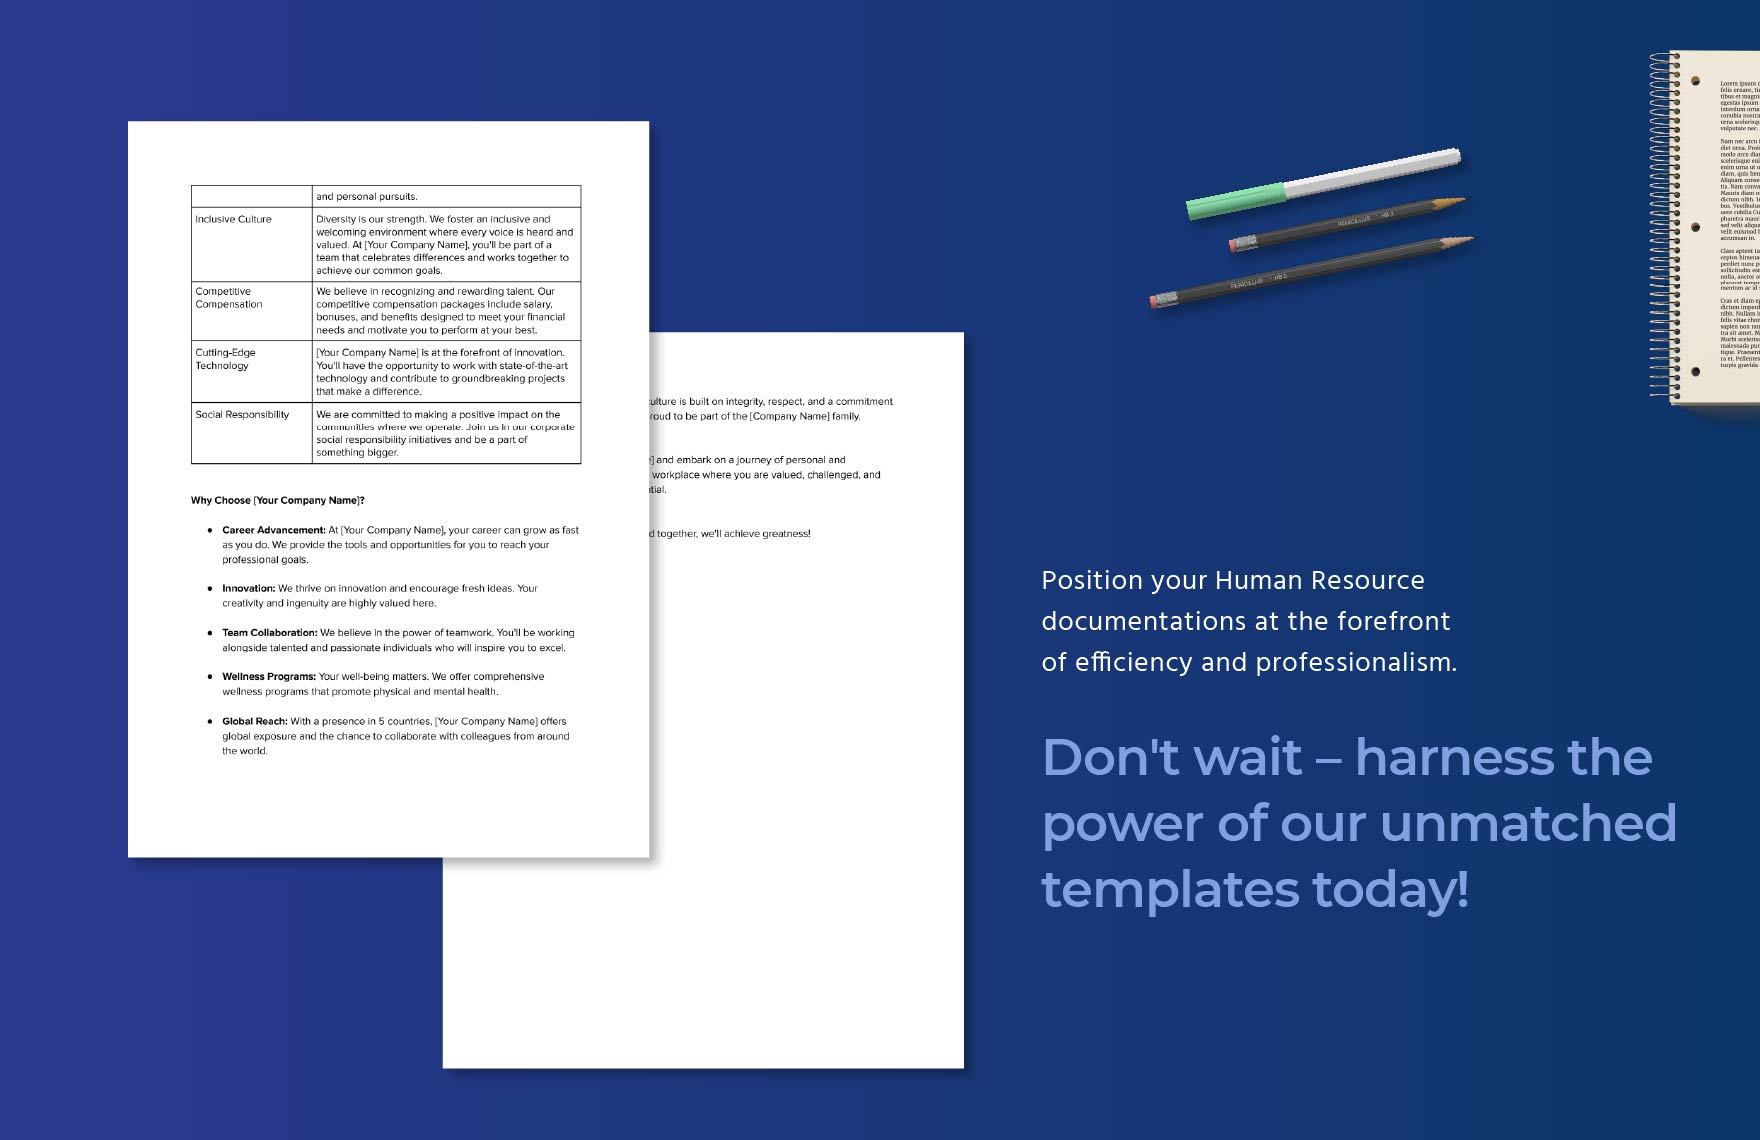 Employee Value Proposition Introduction HR Template